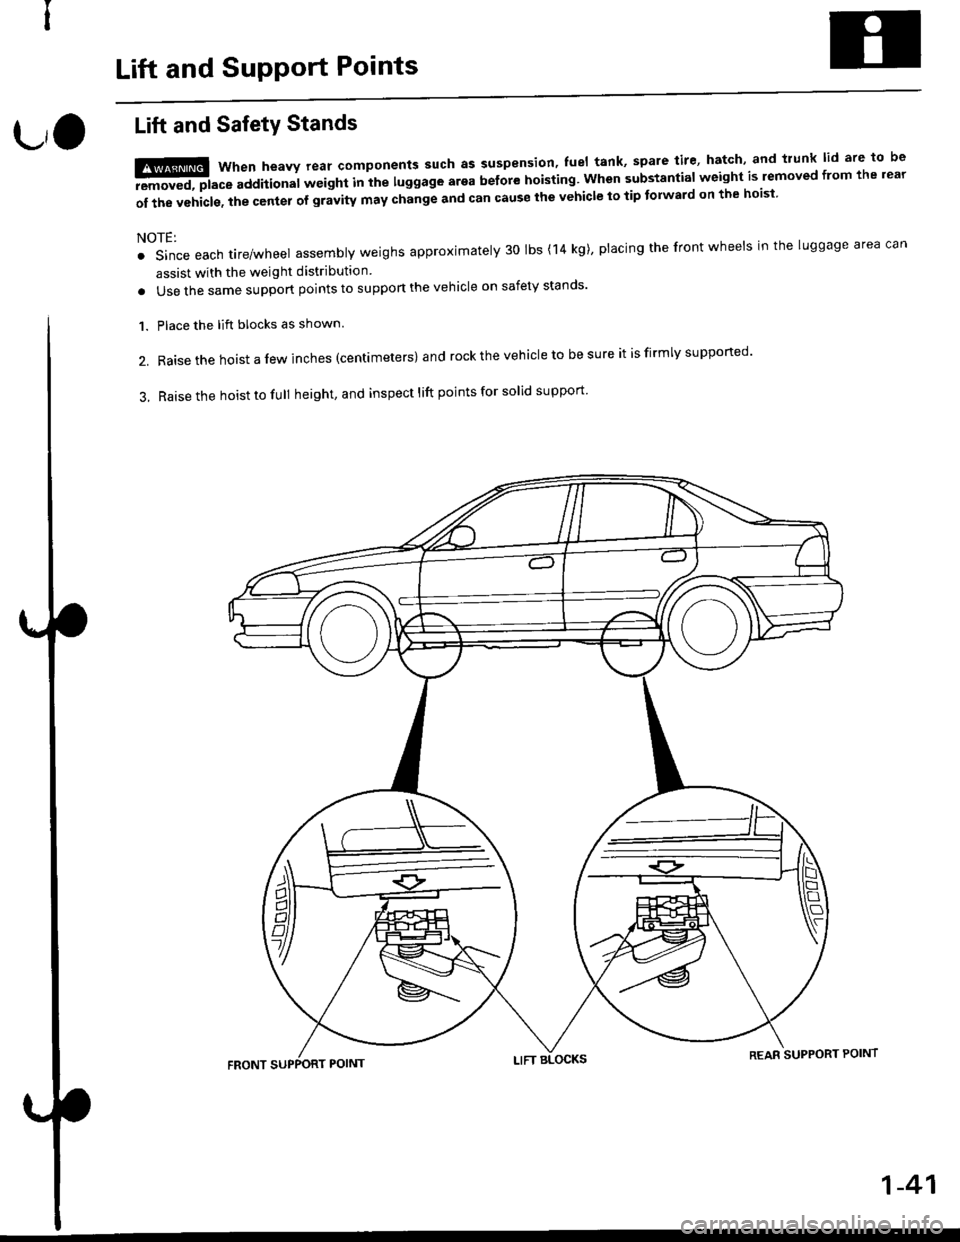 HONDA CIVIC 2000 6.G Service Manual Lift and SupPort Points
L,O
Lift and SafetY Stands
t!ffi when heavv rear components such as suspension fuel tank spare tire hatch and trunk lid are to be
-aEremoved, place additional wetght Inihe 